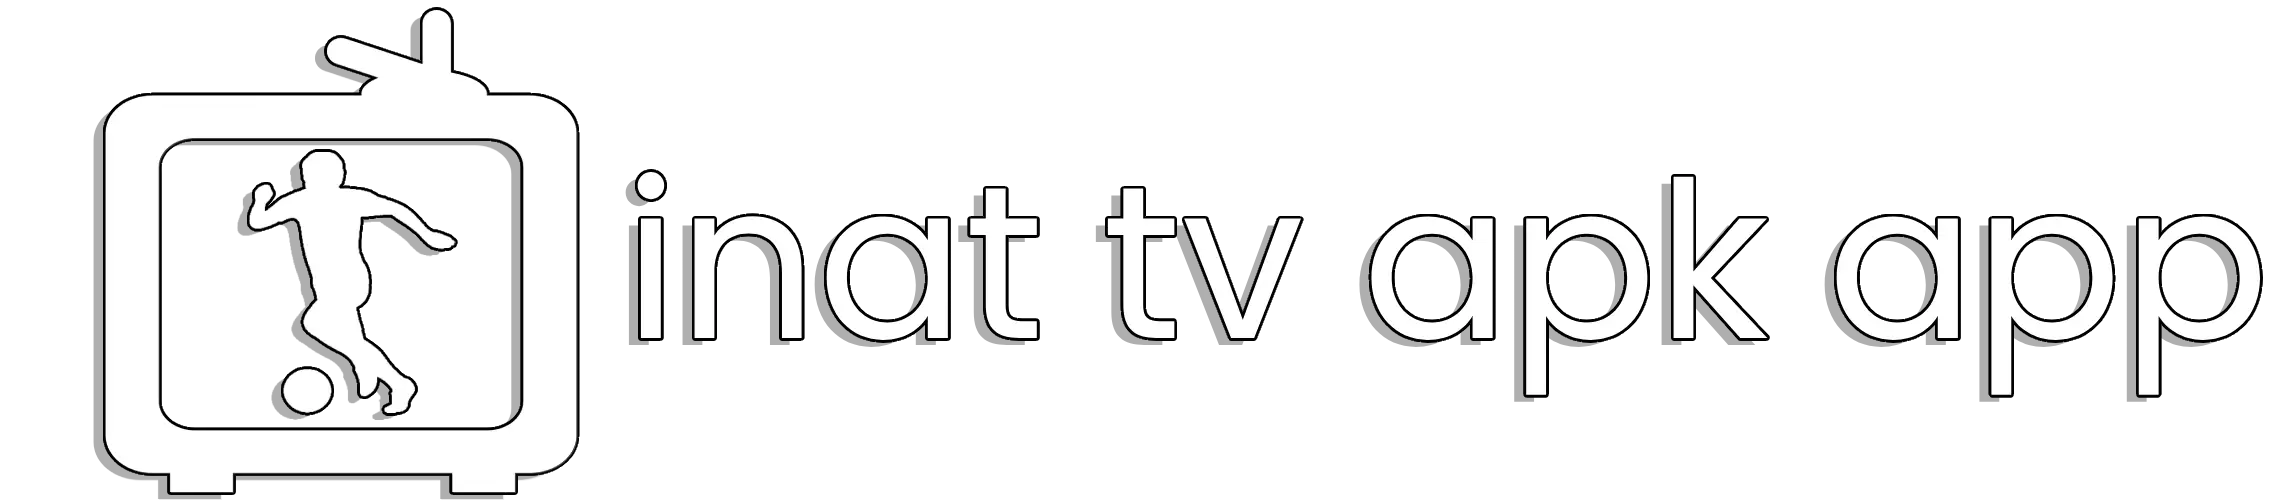 inat tv android apk app